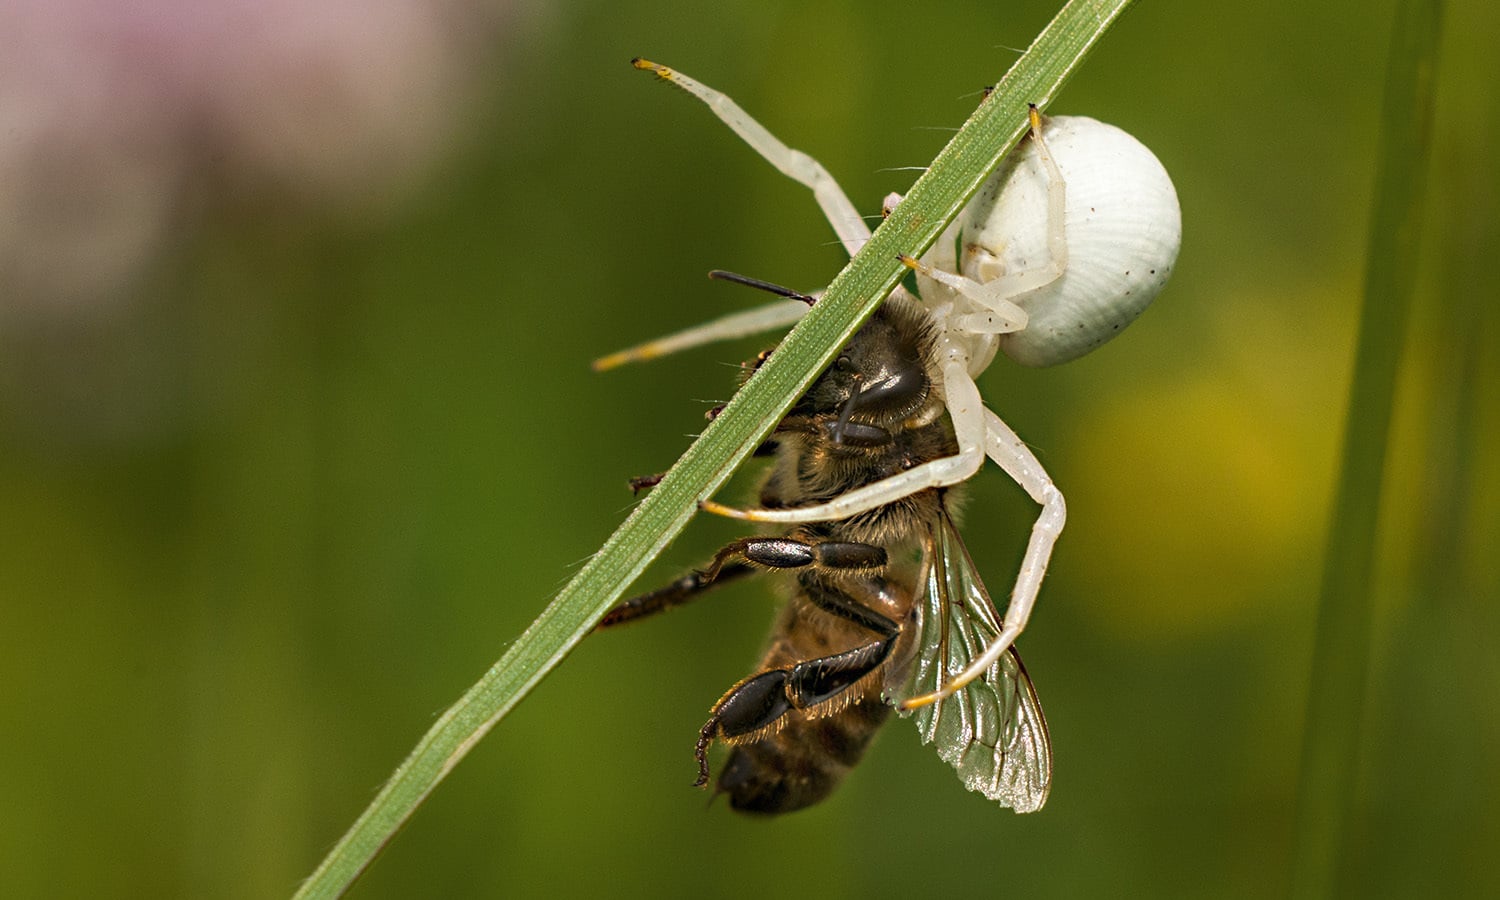  A spider (Misumena vatia) with a freshly killed bee in the Bratental nature reserve, near Göttingen, Lower Saxony, Germany. — Photo by Suhaknoke